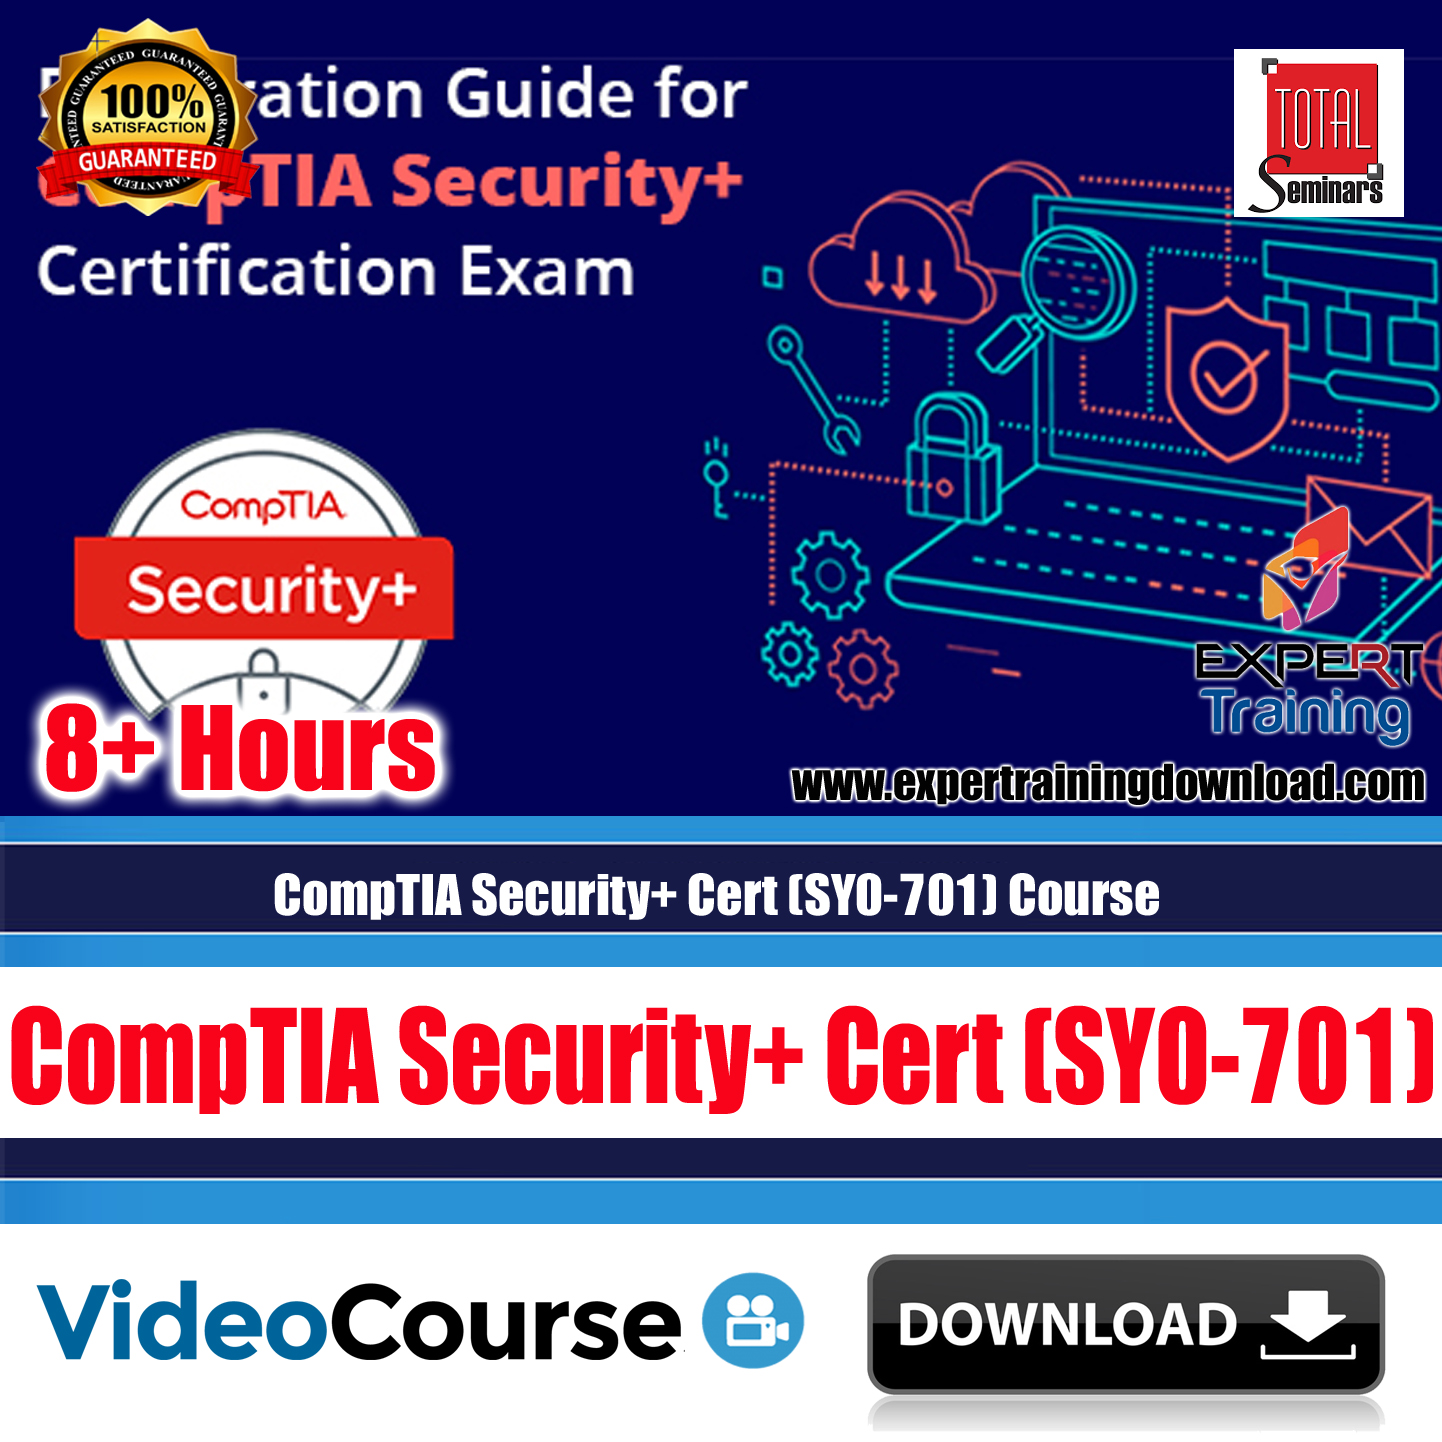 CompTIA Security+ Cert (SY0-701) Course